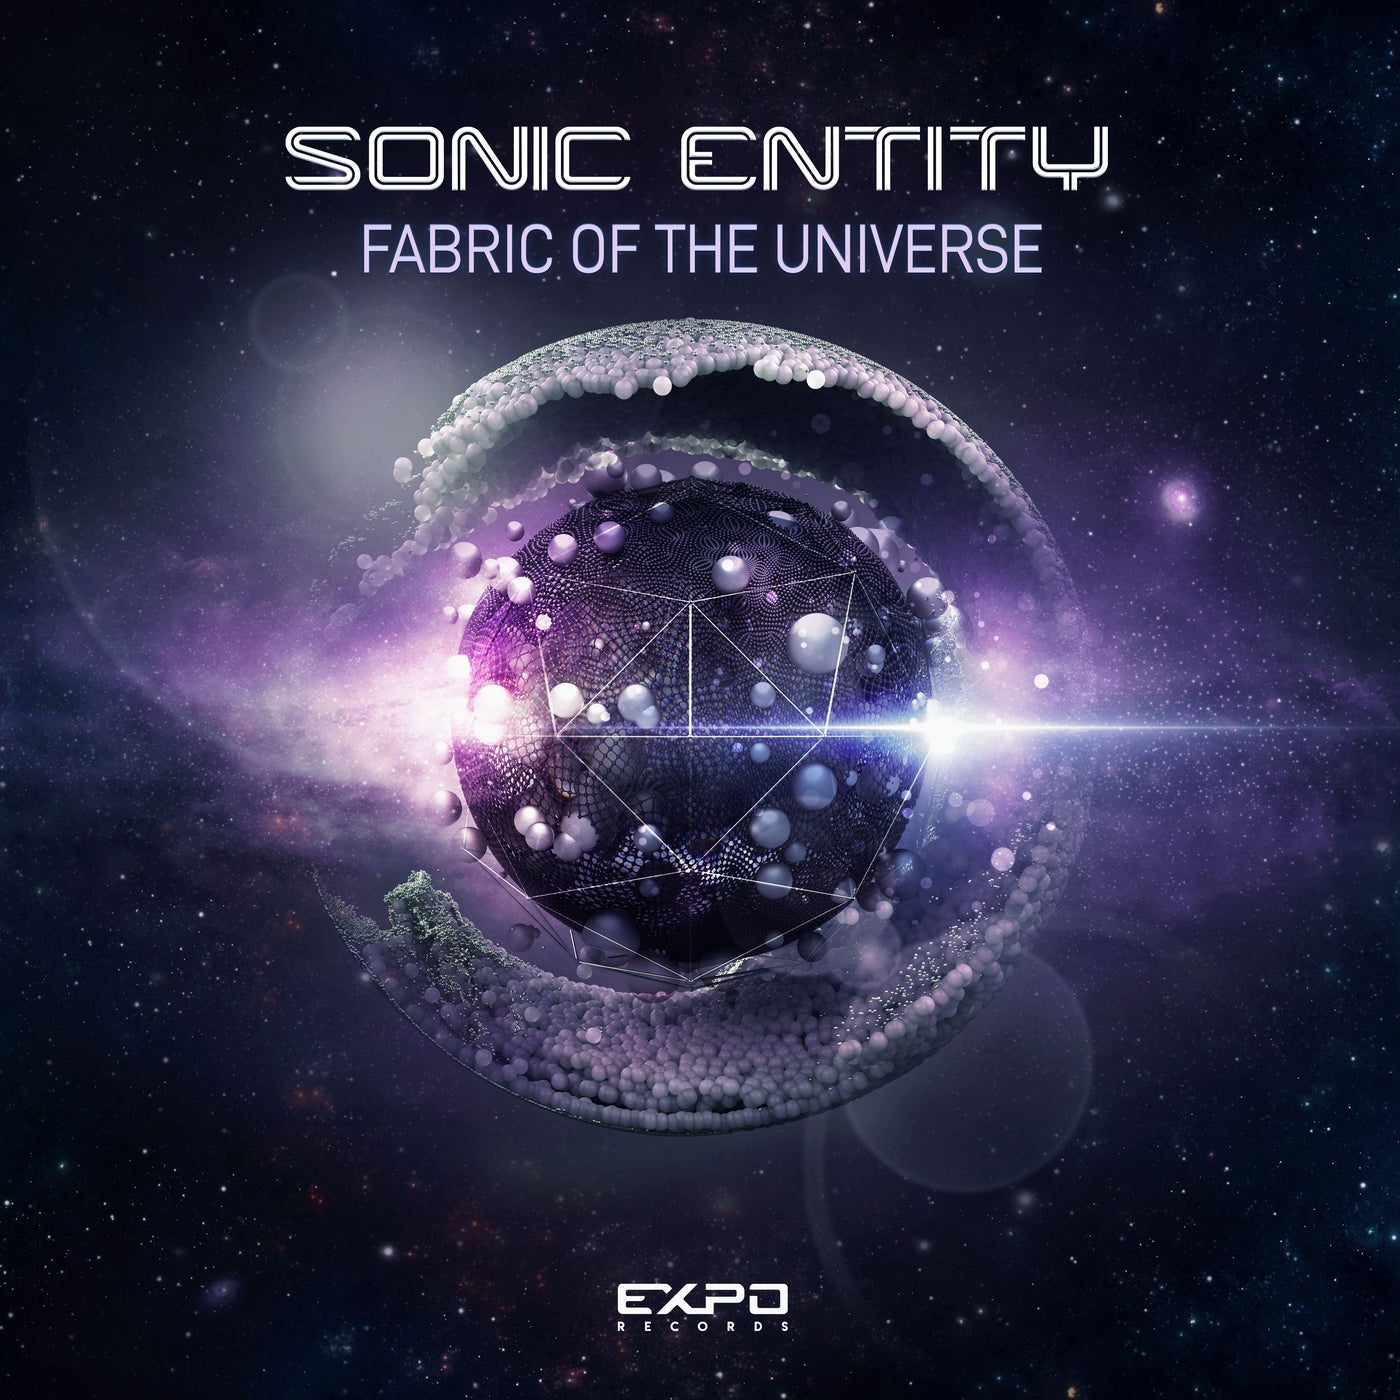 Sonic Entity - Fabric of the Universe [Expo Records]